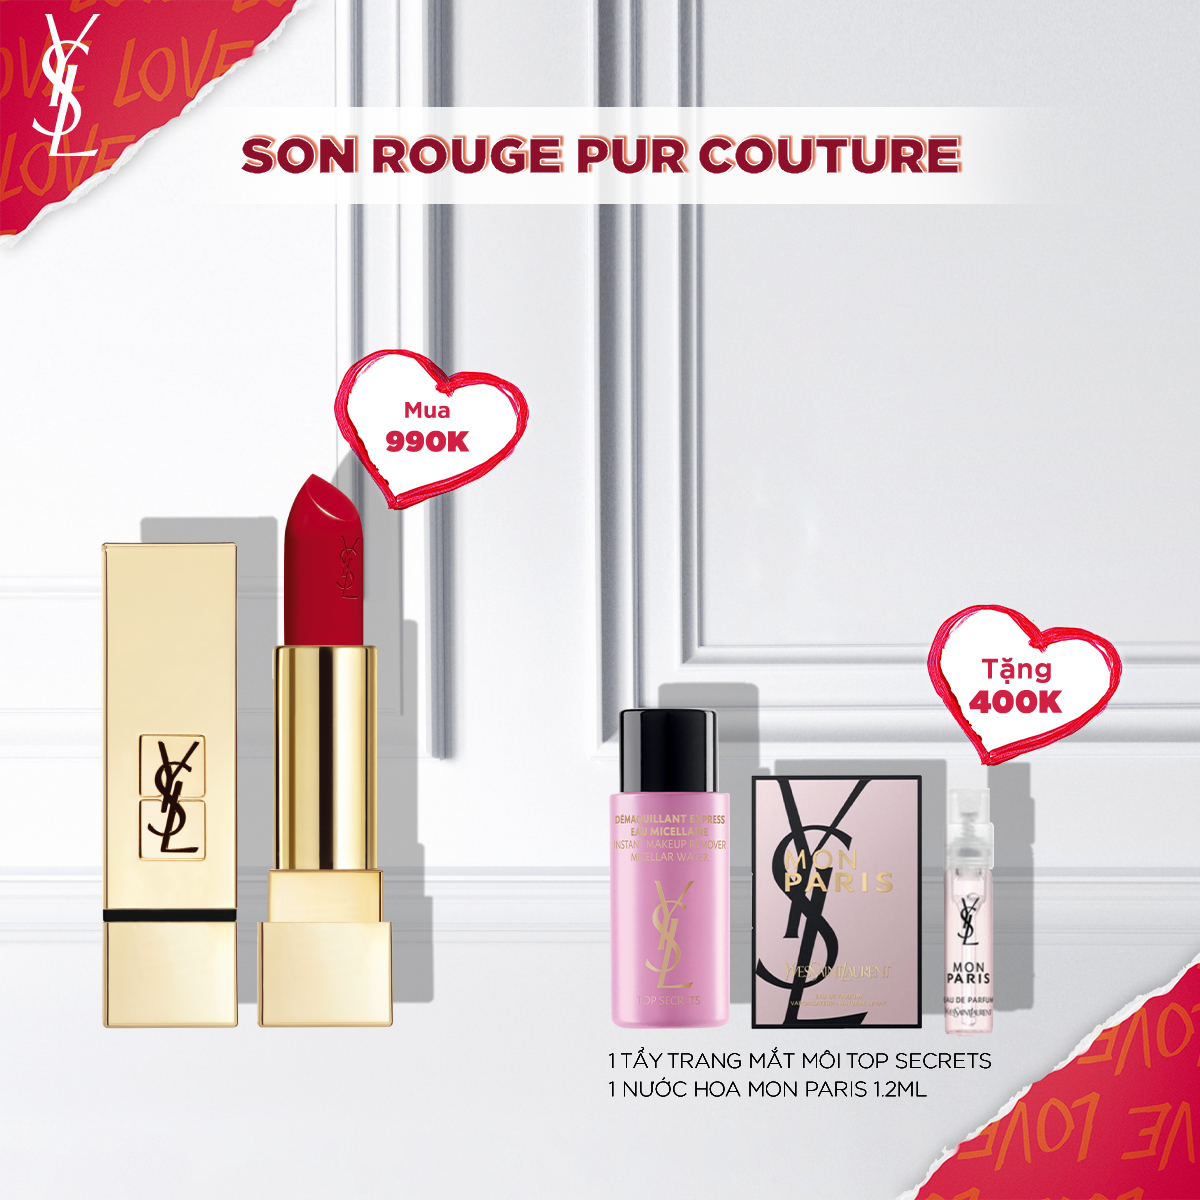 Set Son môi Rouge Pur Couture